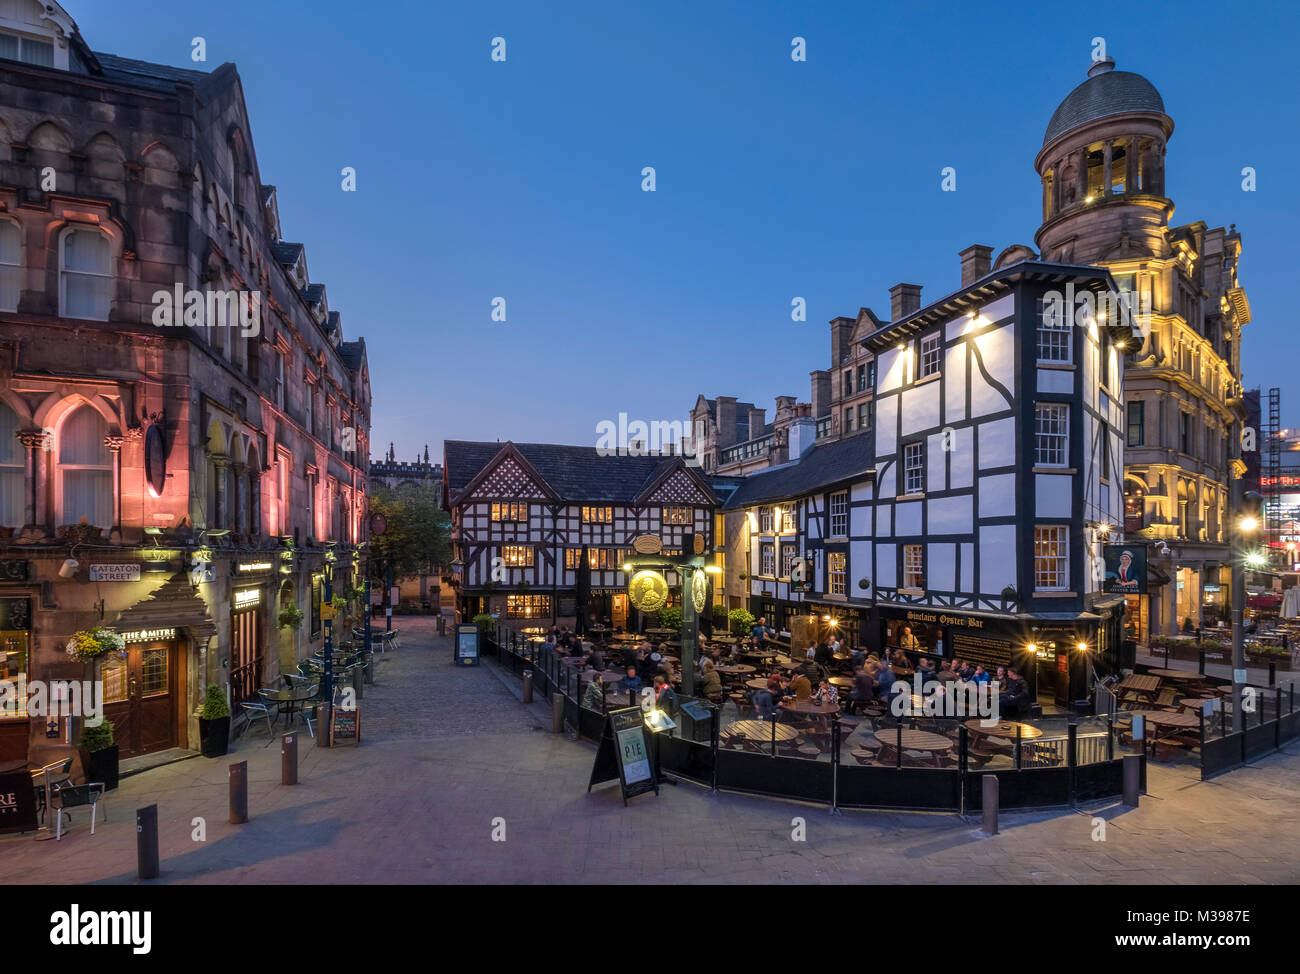 The Shambles and Shambles Square at night, Manchester, Greater Manchester, England, UK Stock Photo